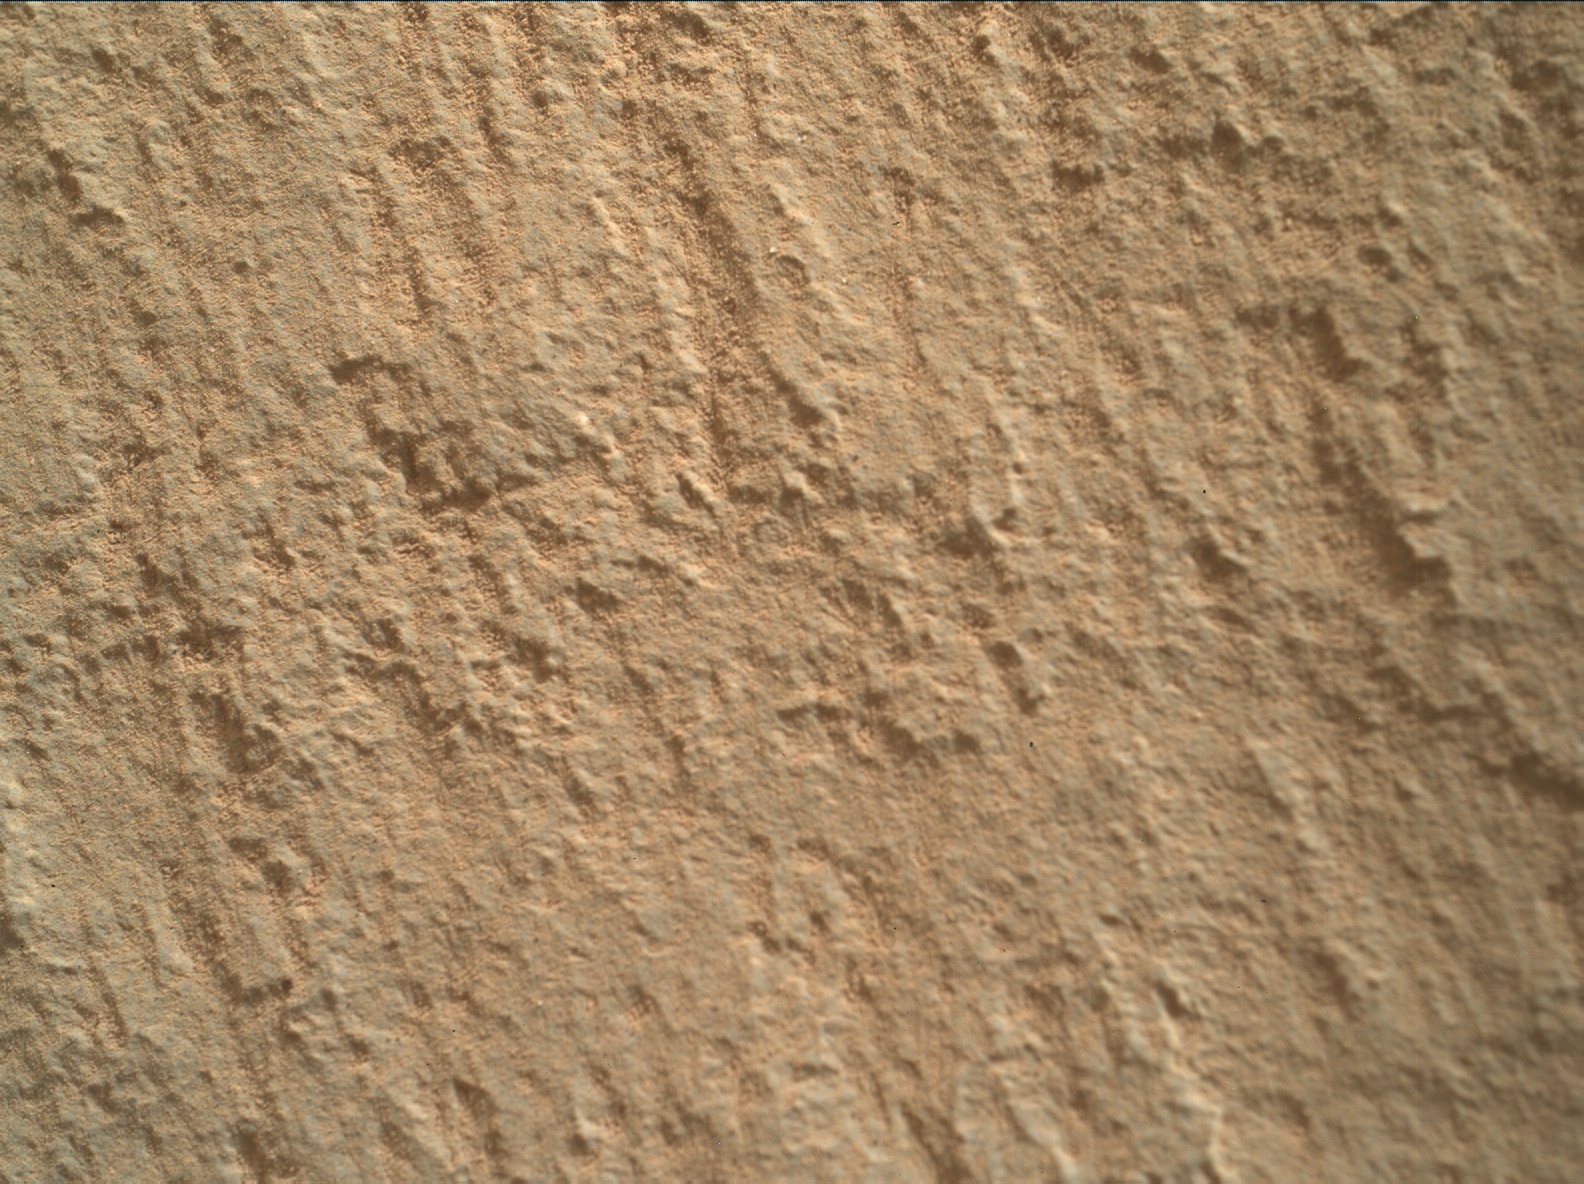 Nasa's Mars rover Curiosity acquired this image using its Mars Hand Lens Imager (MAHLI) on Sol 2701